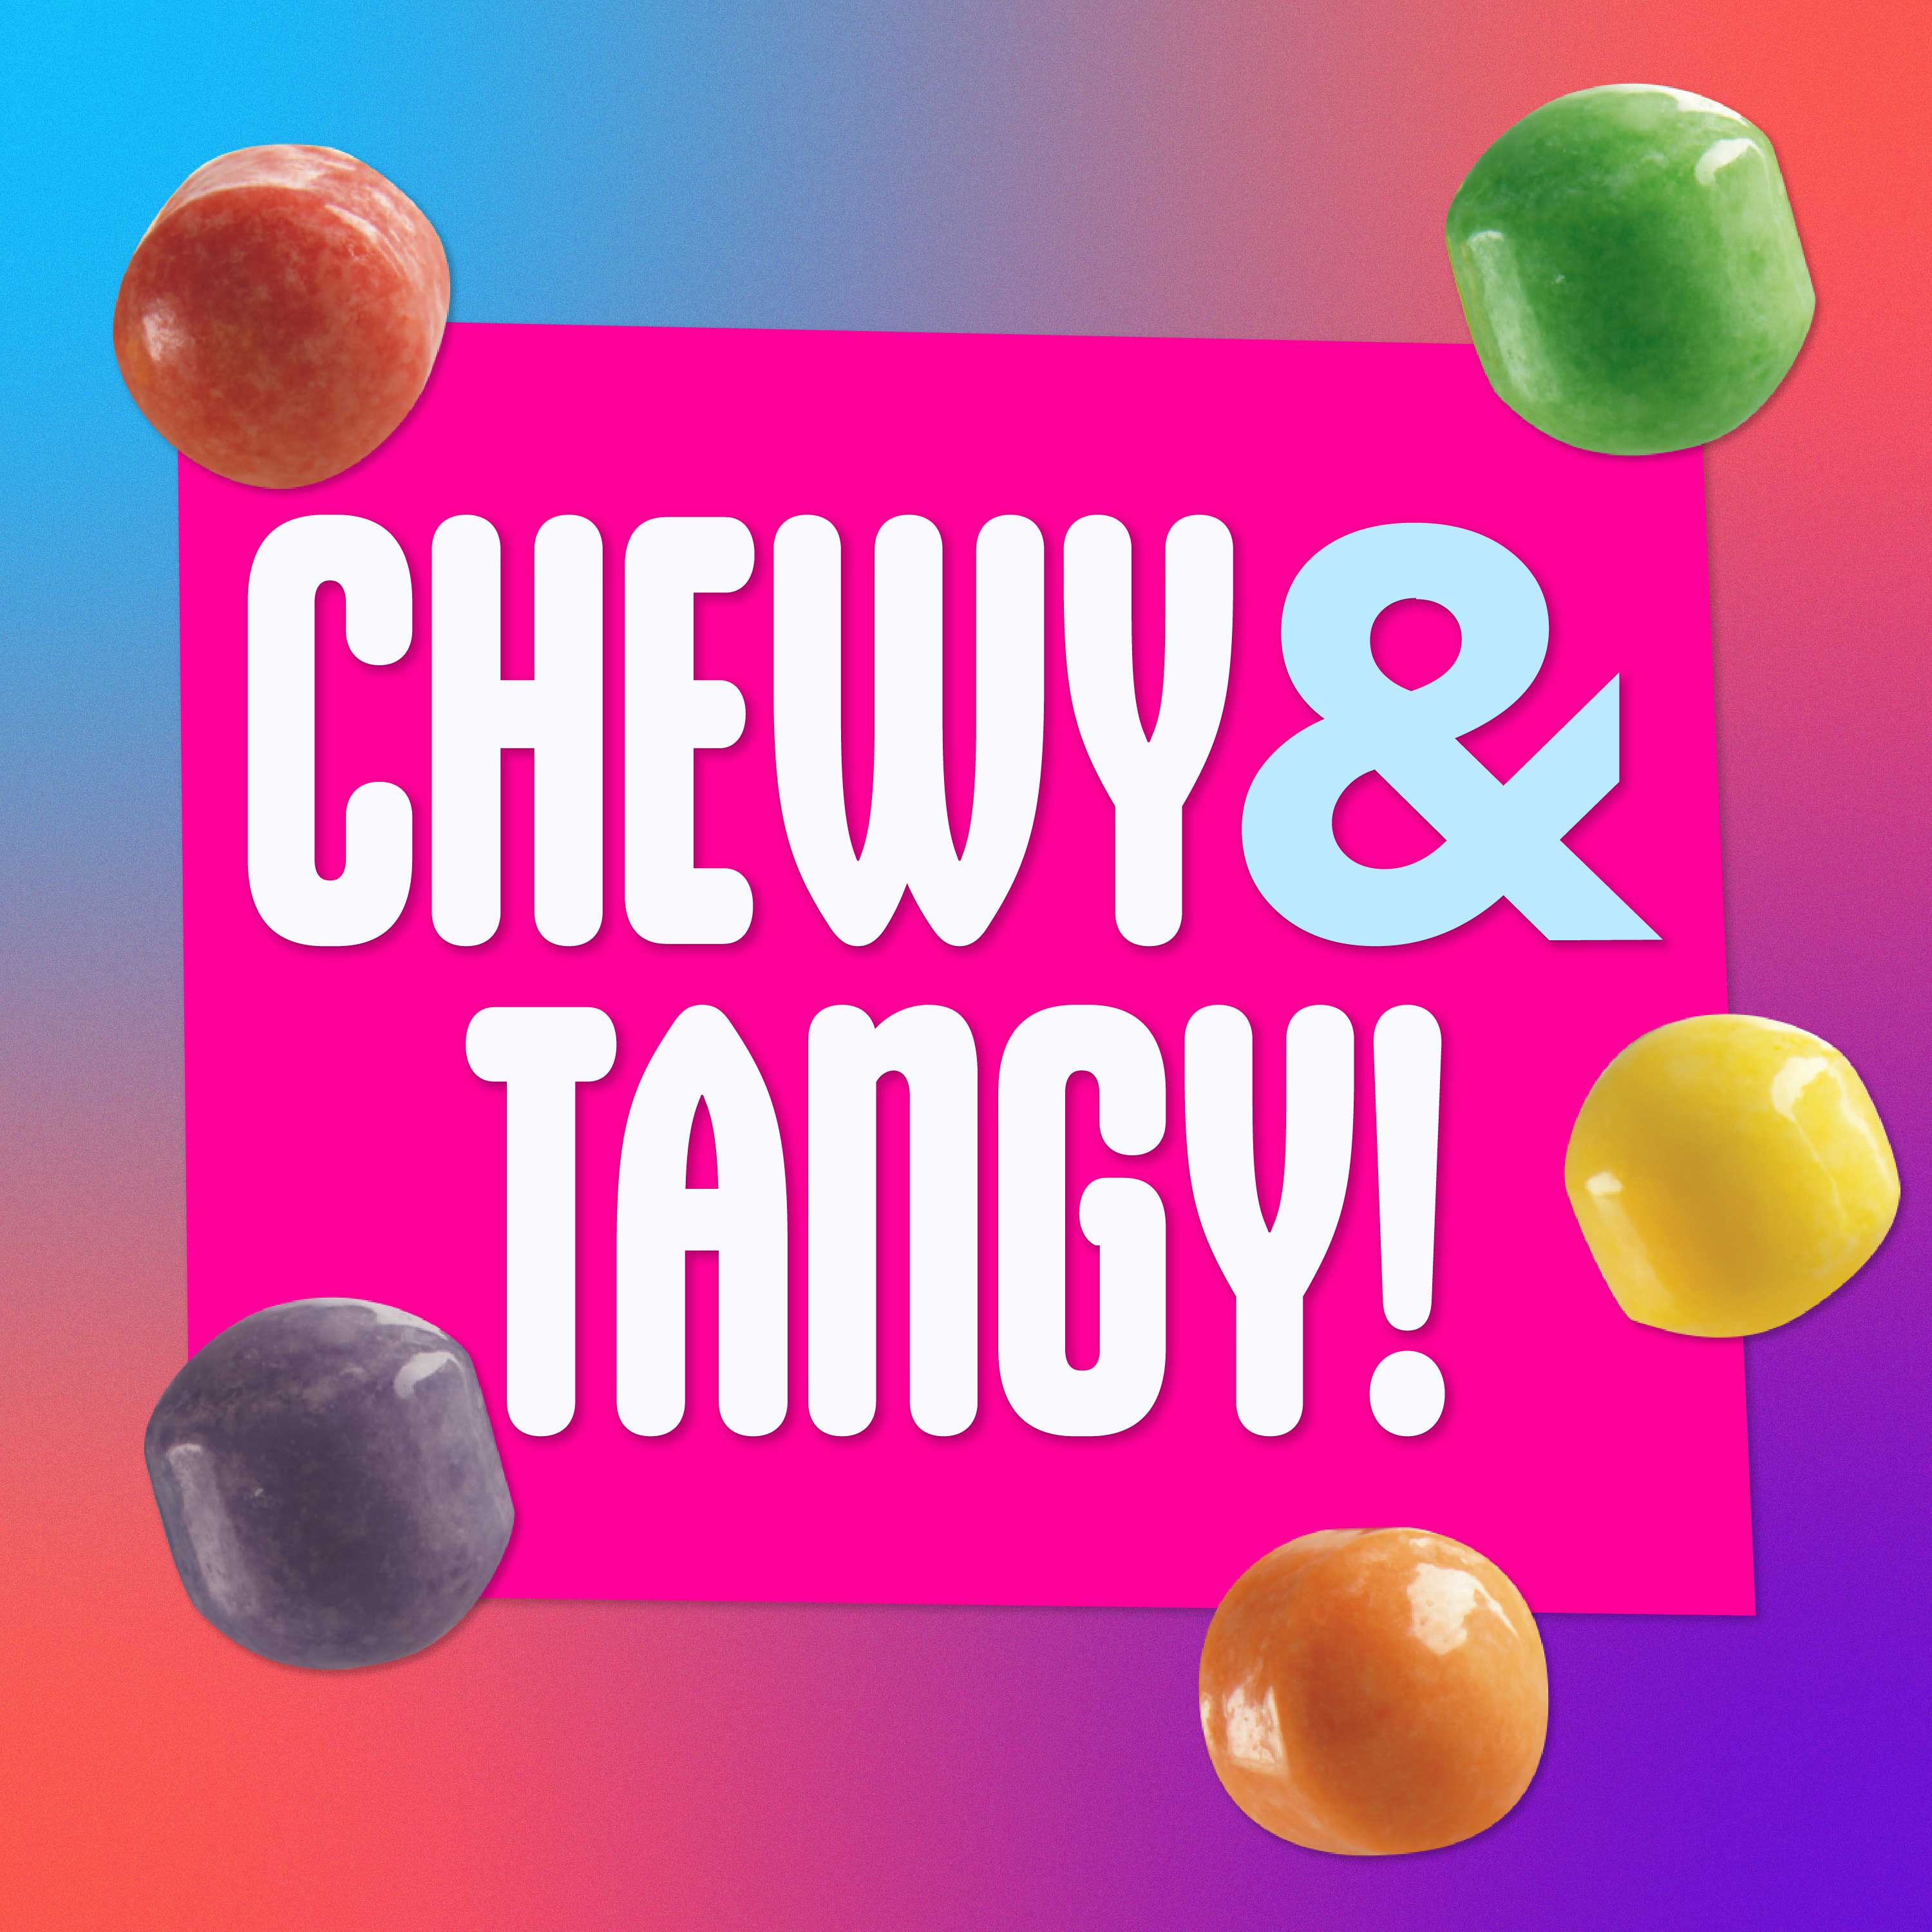 SweeTARTS Mini Chewy Candy, Mixed Fruit Flavored, 12 oz - image 5 of 7